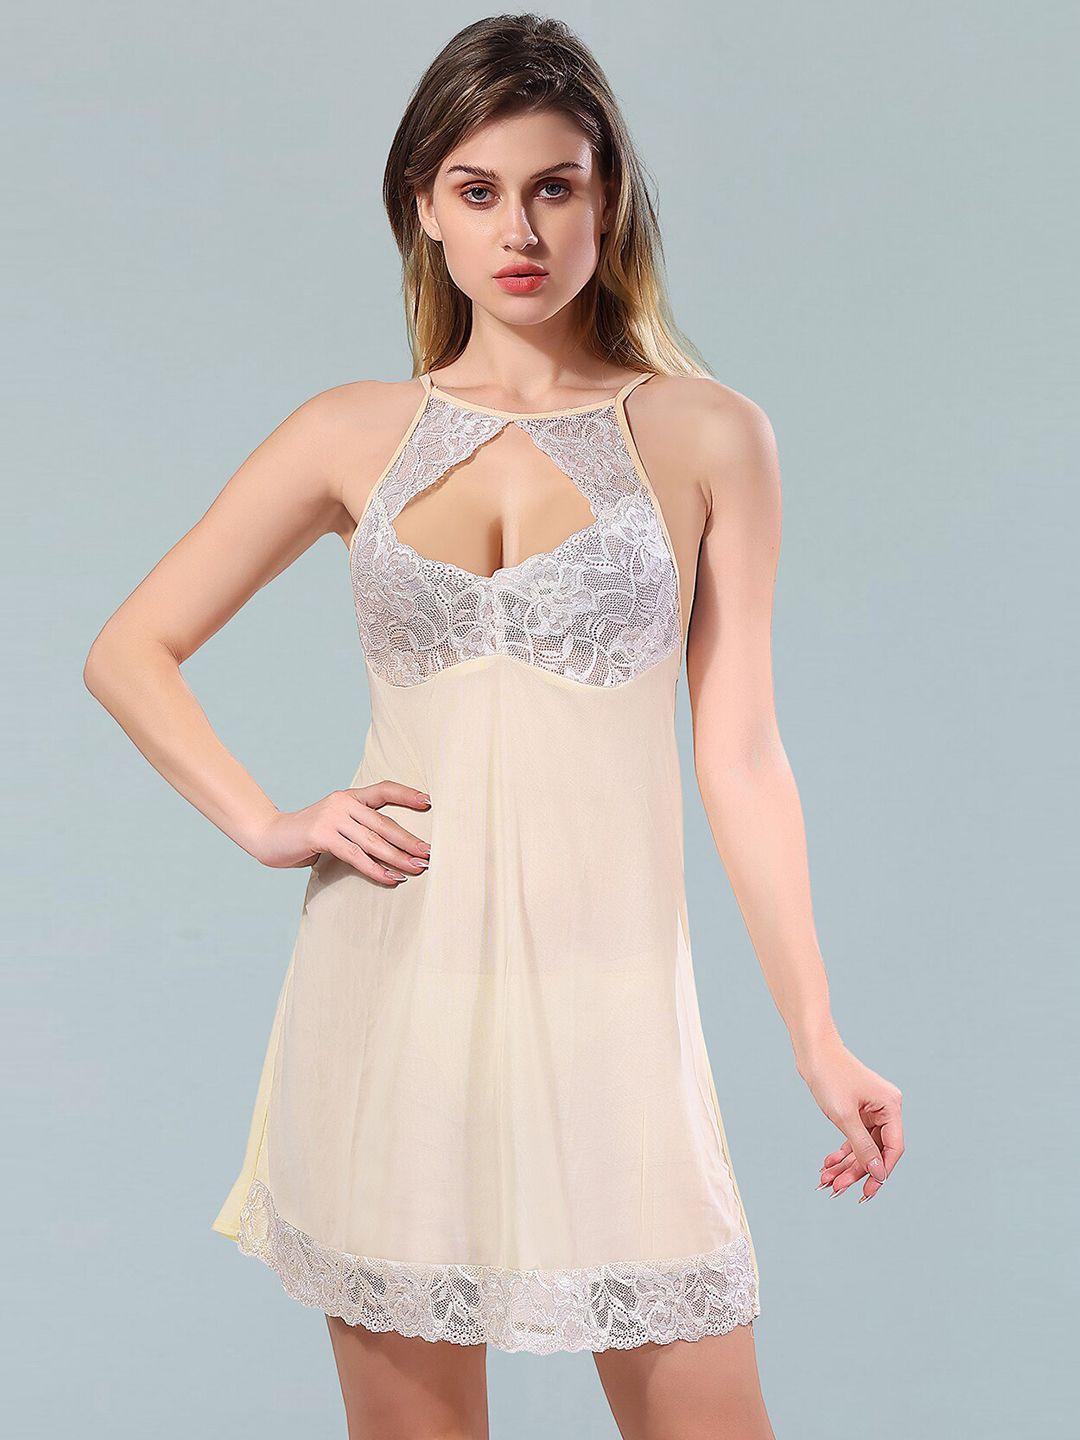 be you cream-coloured net baby doll